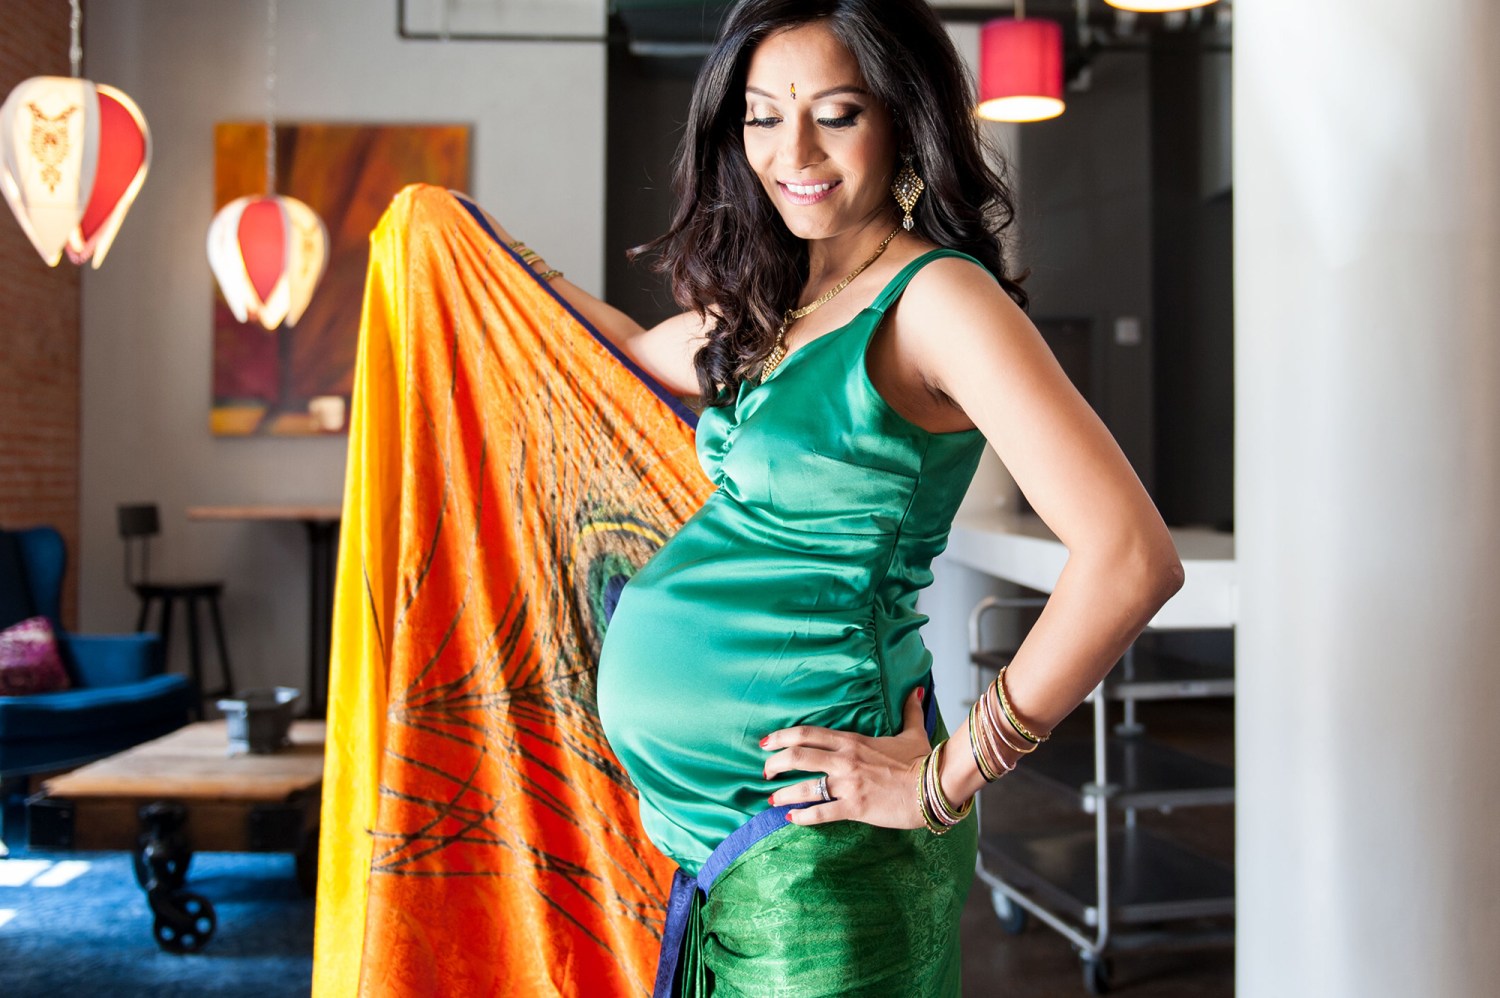 With few options for maternity-friendly saris, this mother wants